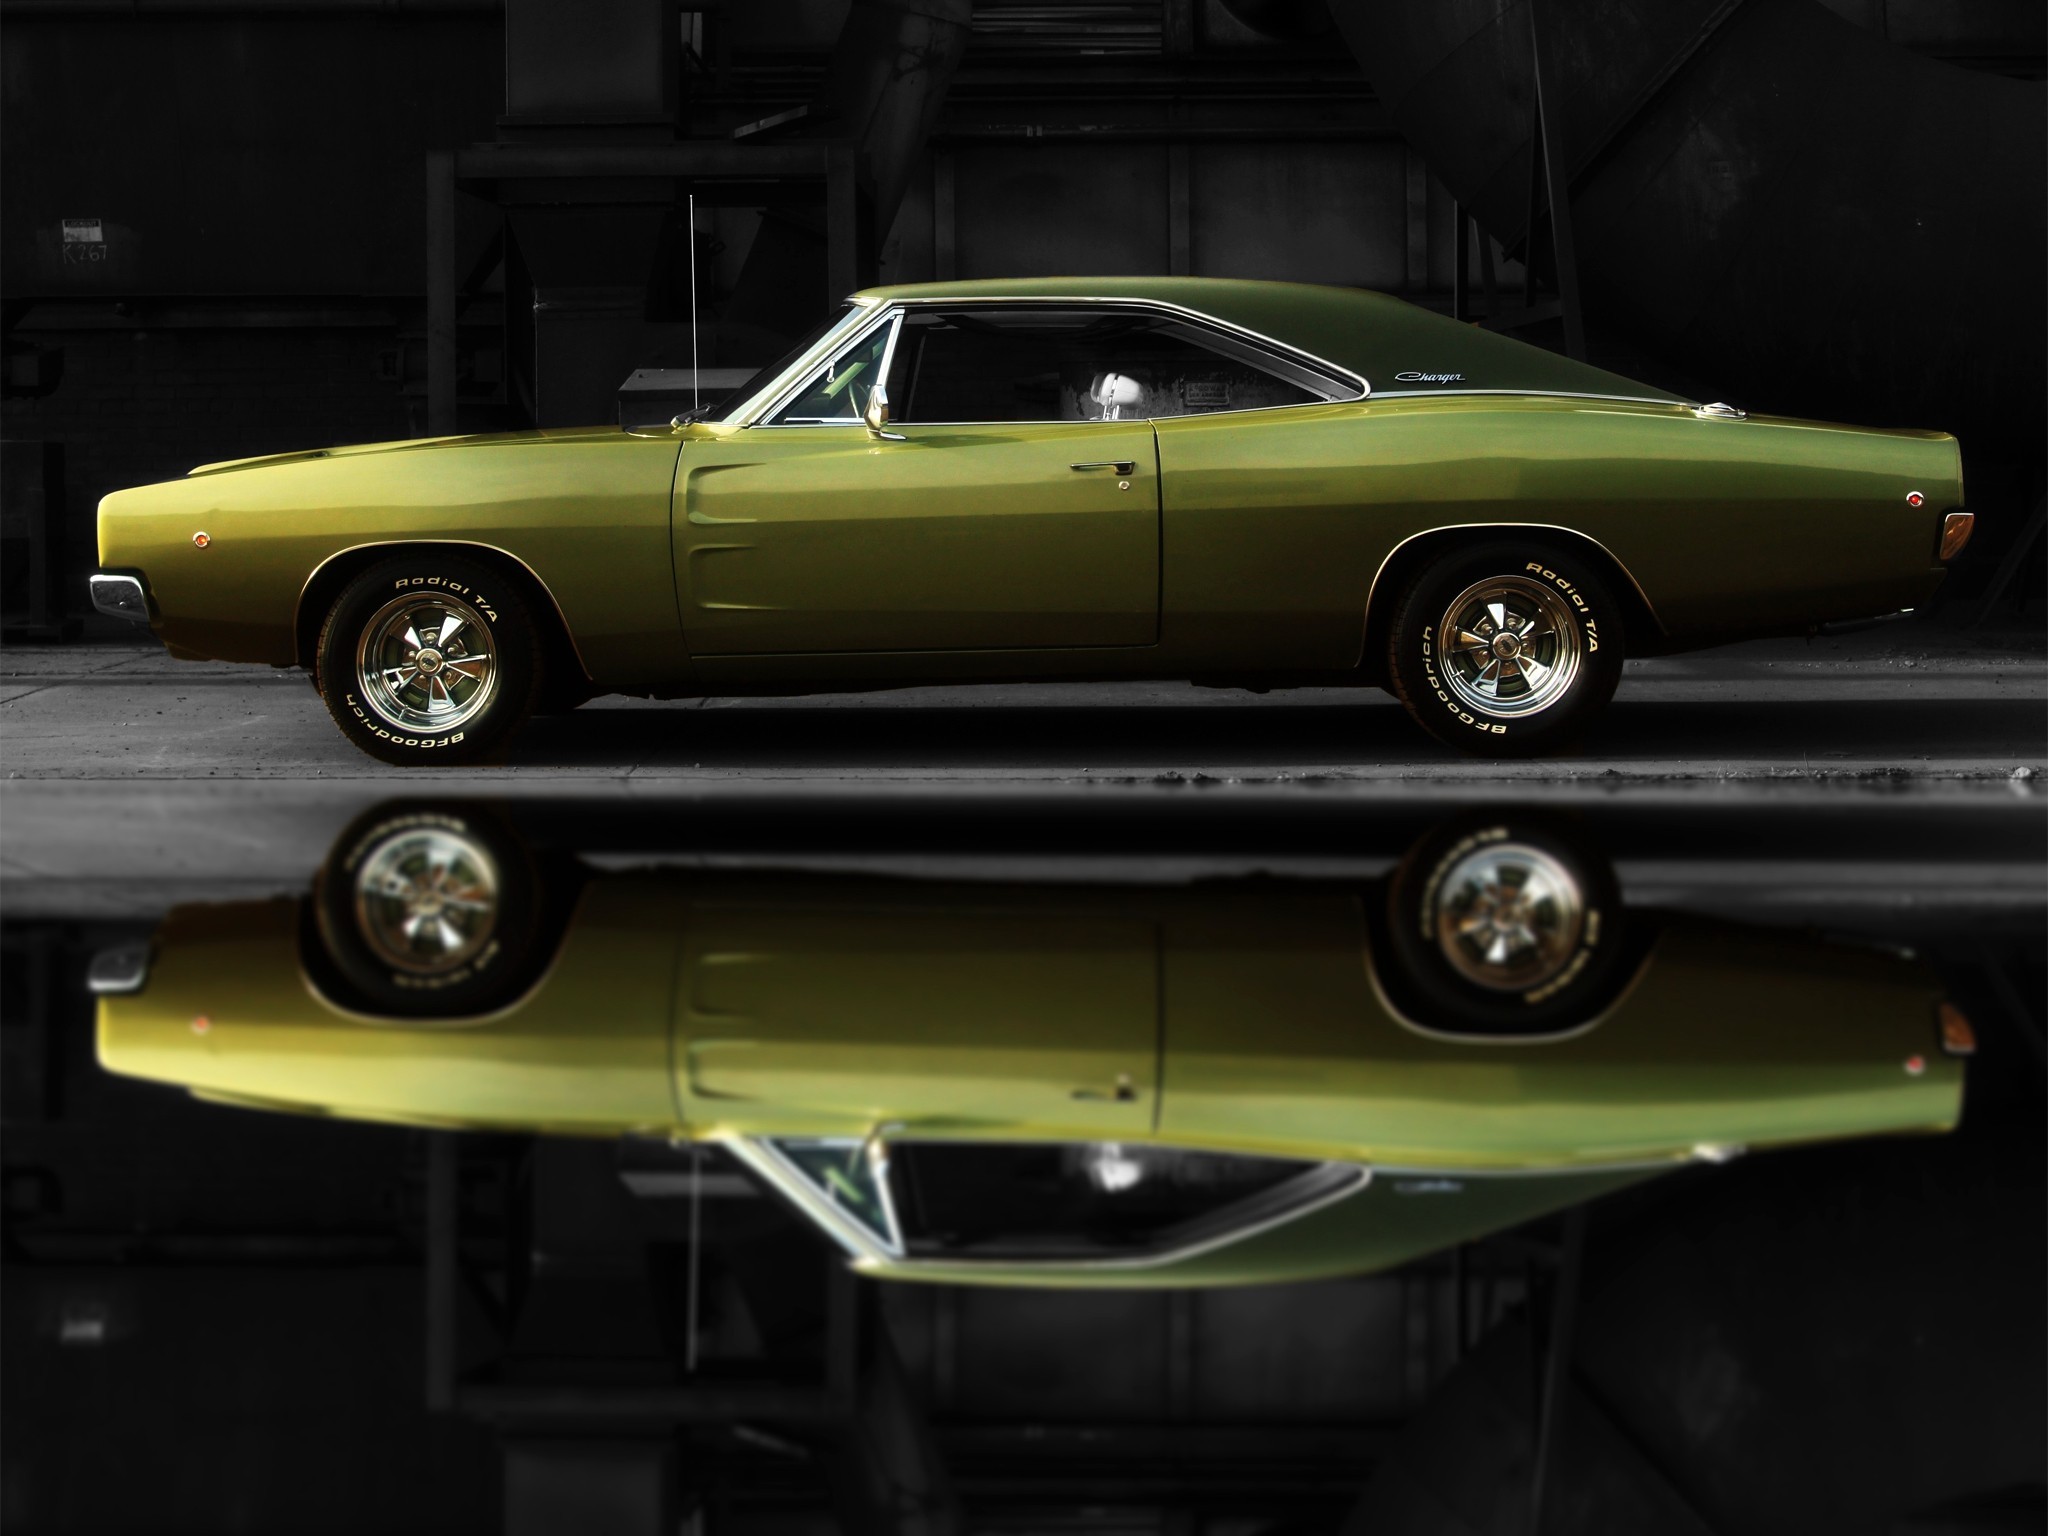 2048x1536 Dodge, Dodge Charger, Muscle Cars, Old Car, Car, Reflection